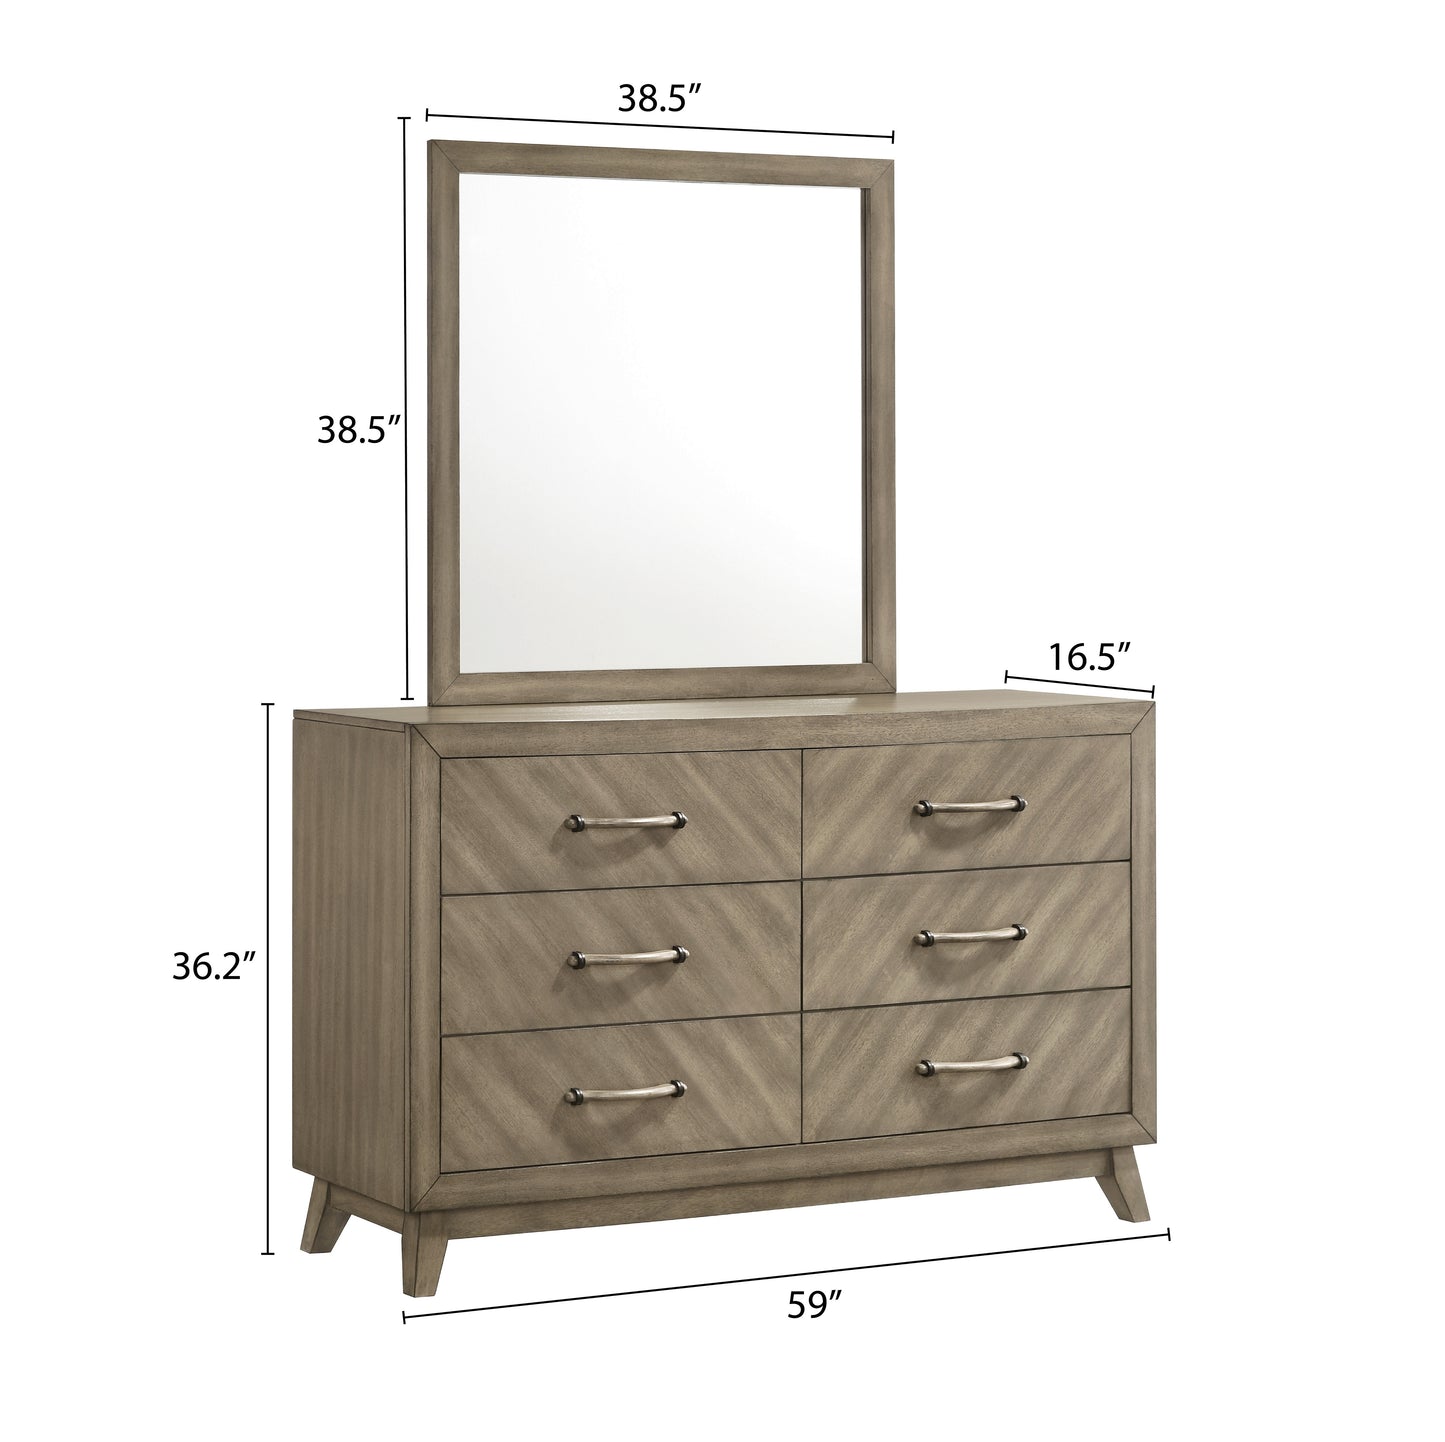 Roundhill Furniture Arena Contemporary 6-Drawer Dresser with Mirror in Antique Gray